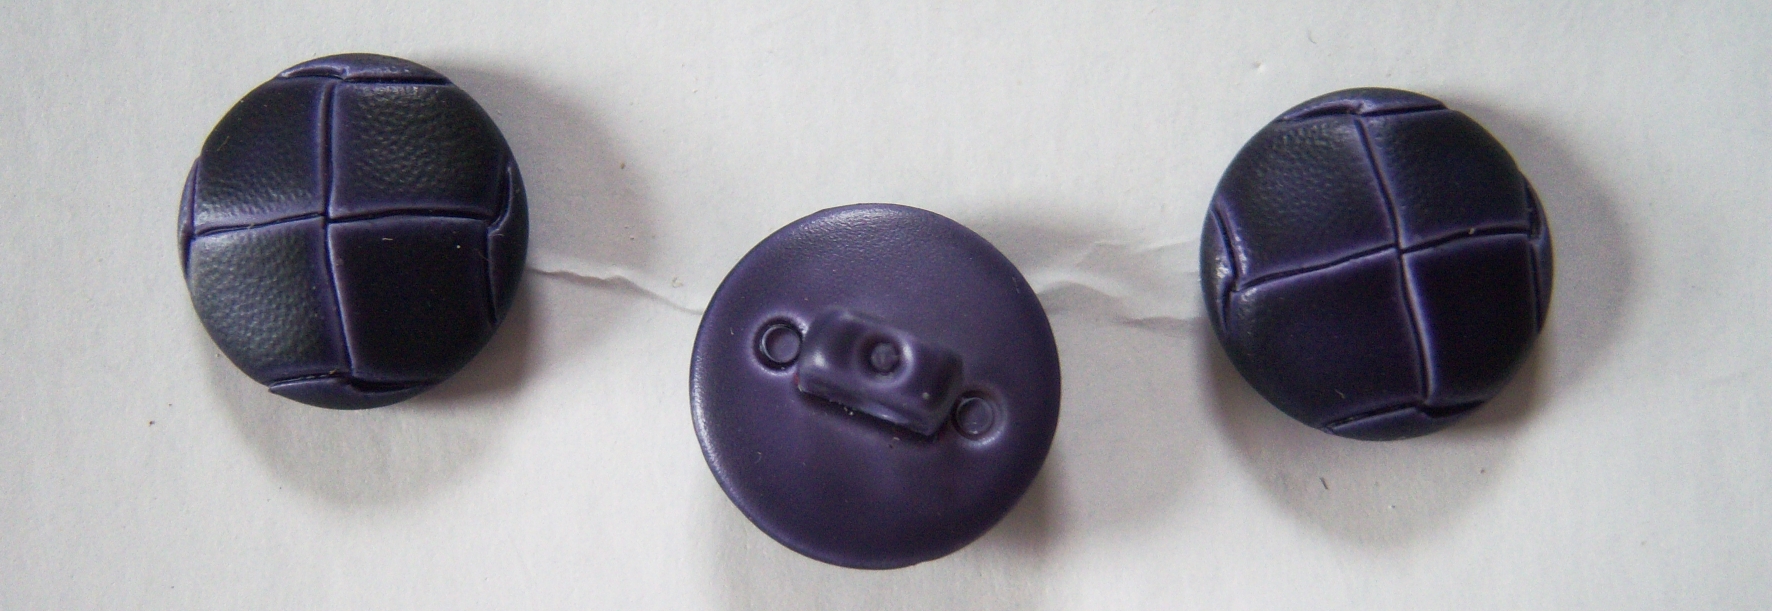 Plum Faux Leather 5/8" Shank Poly Button